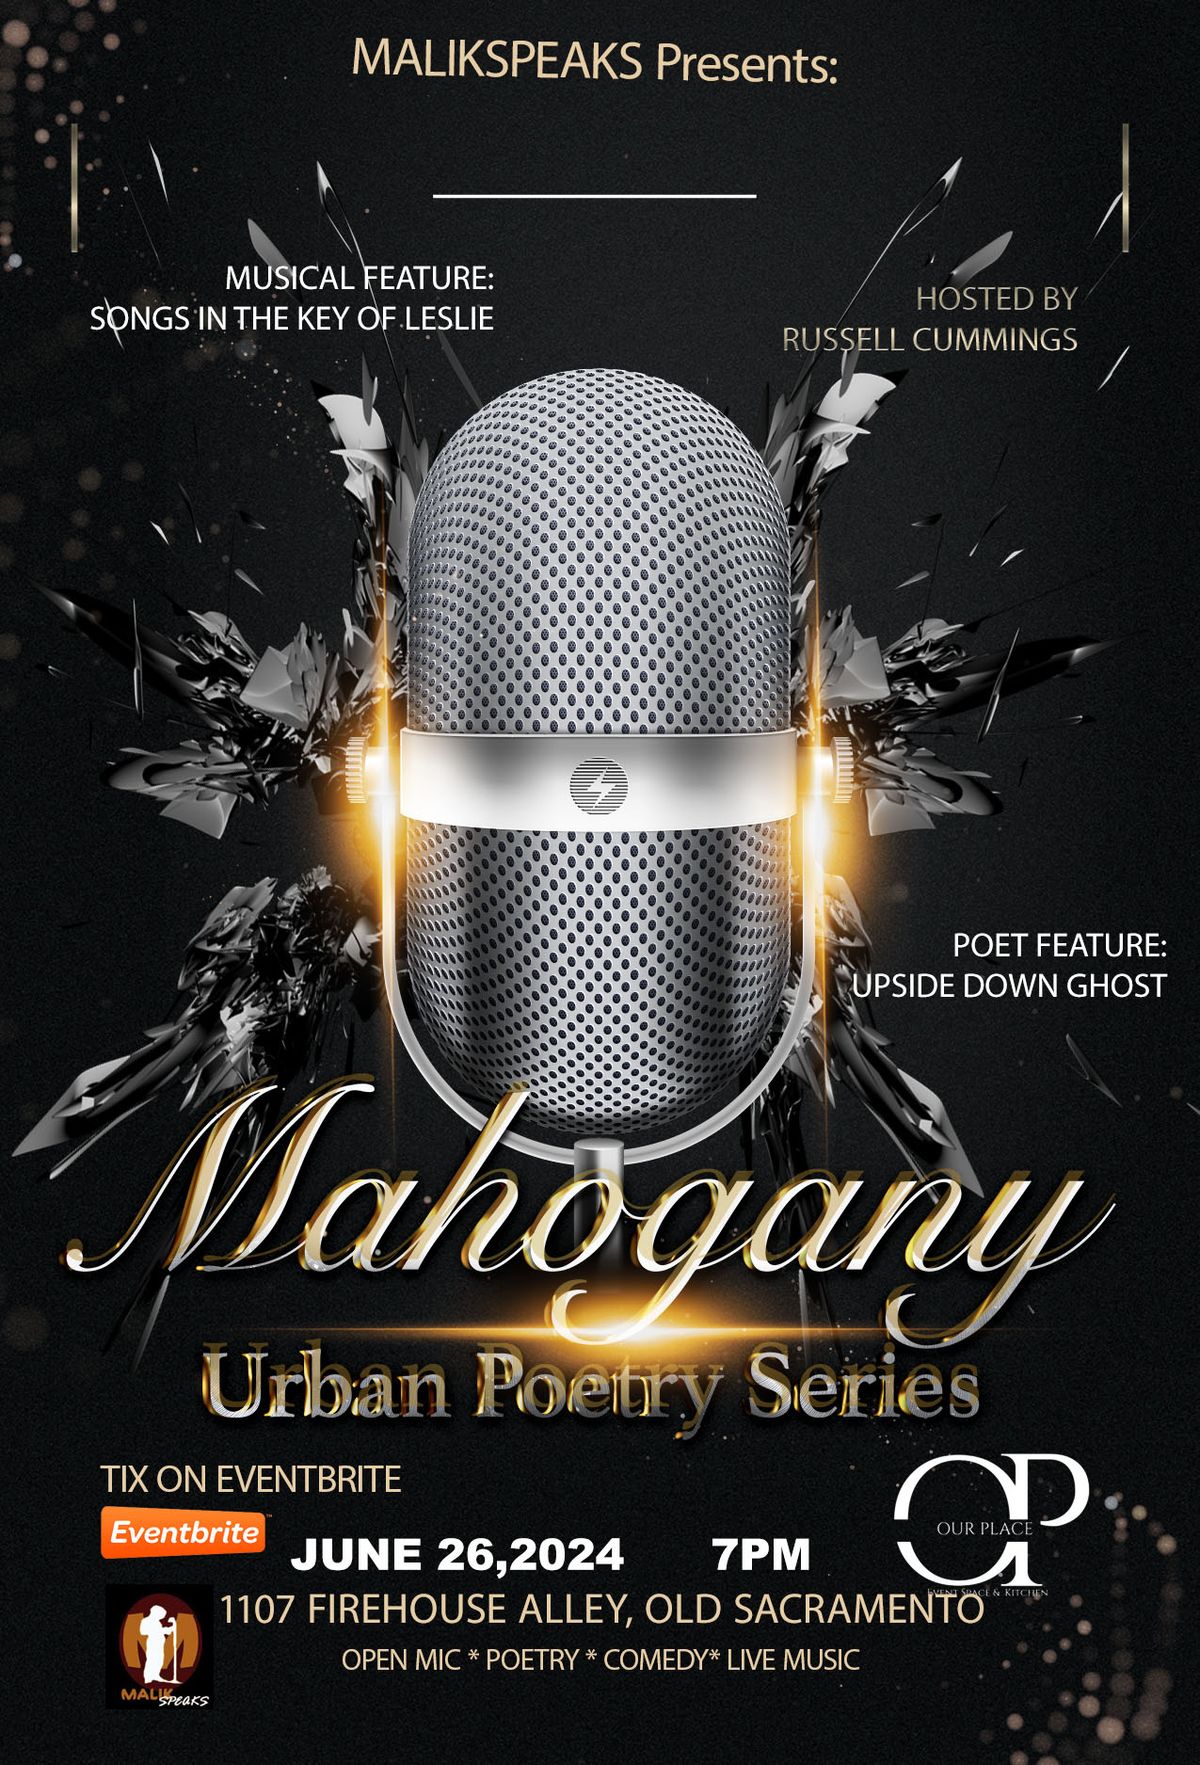 Mahogany Urban Poetry feat. Upside Down Ghost and Songs in the Key of Leslie